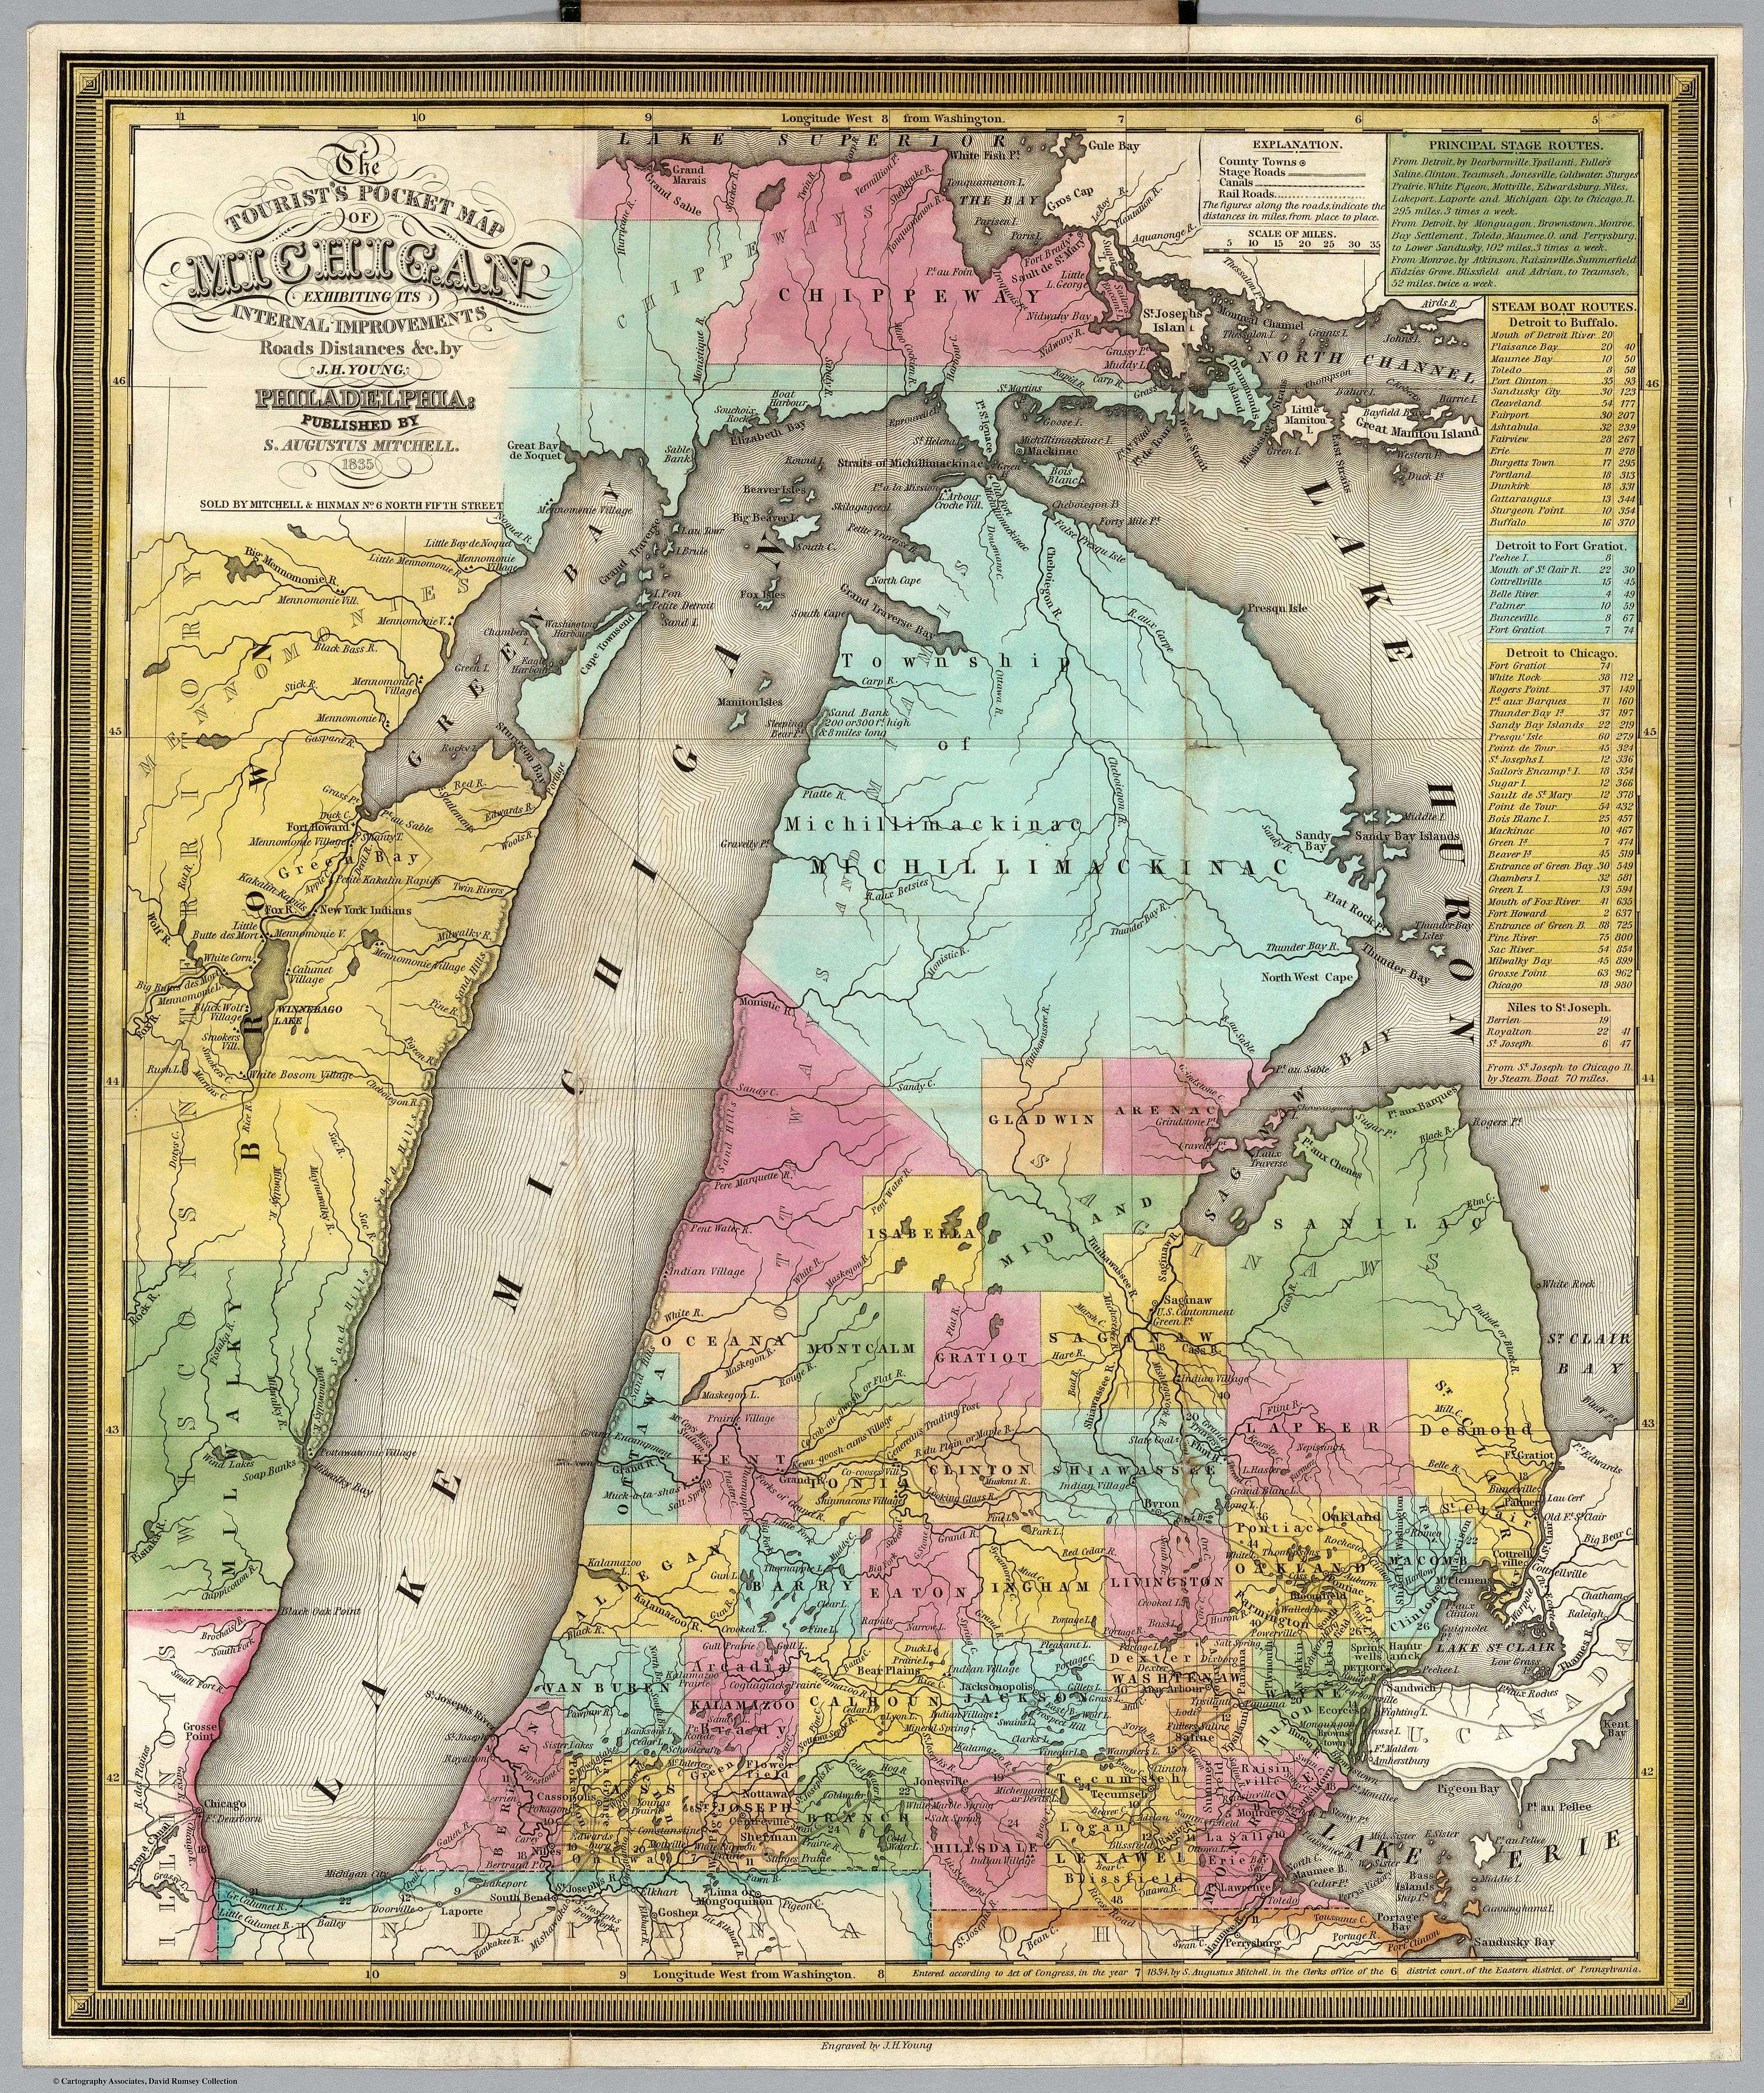 According to a historical map of Michigan originally published in 1831, the Rifle River may have previously been referred to as Grindstone Creek.